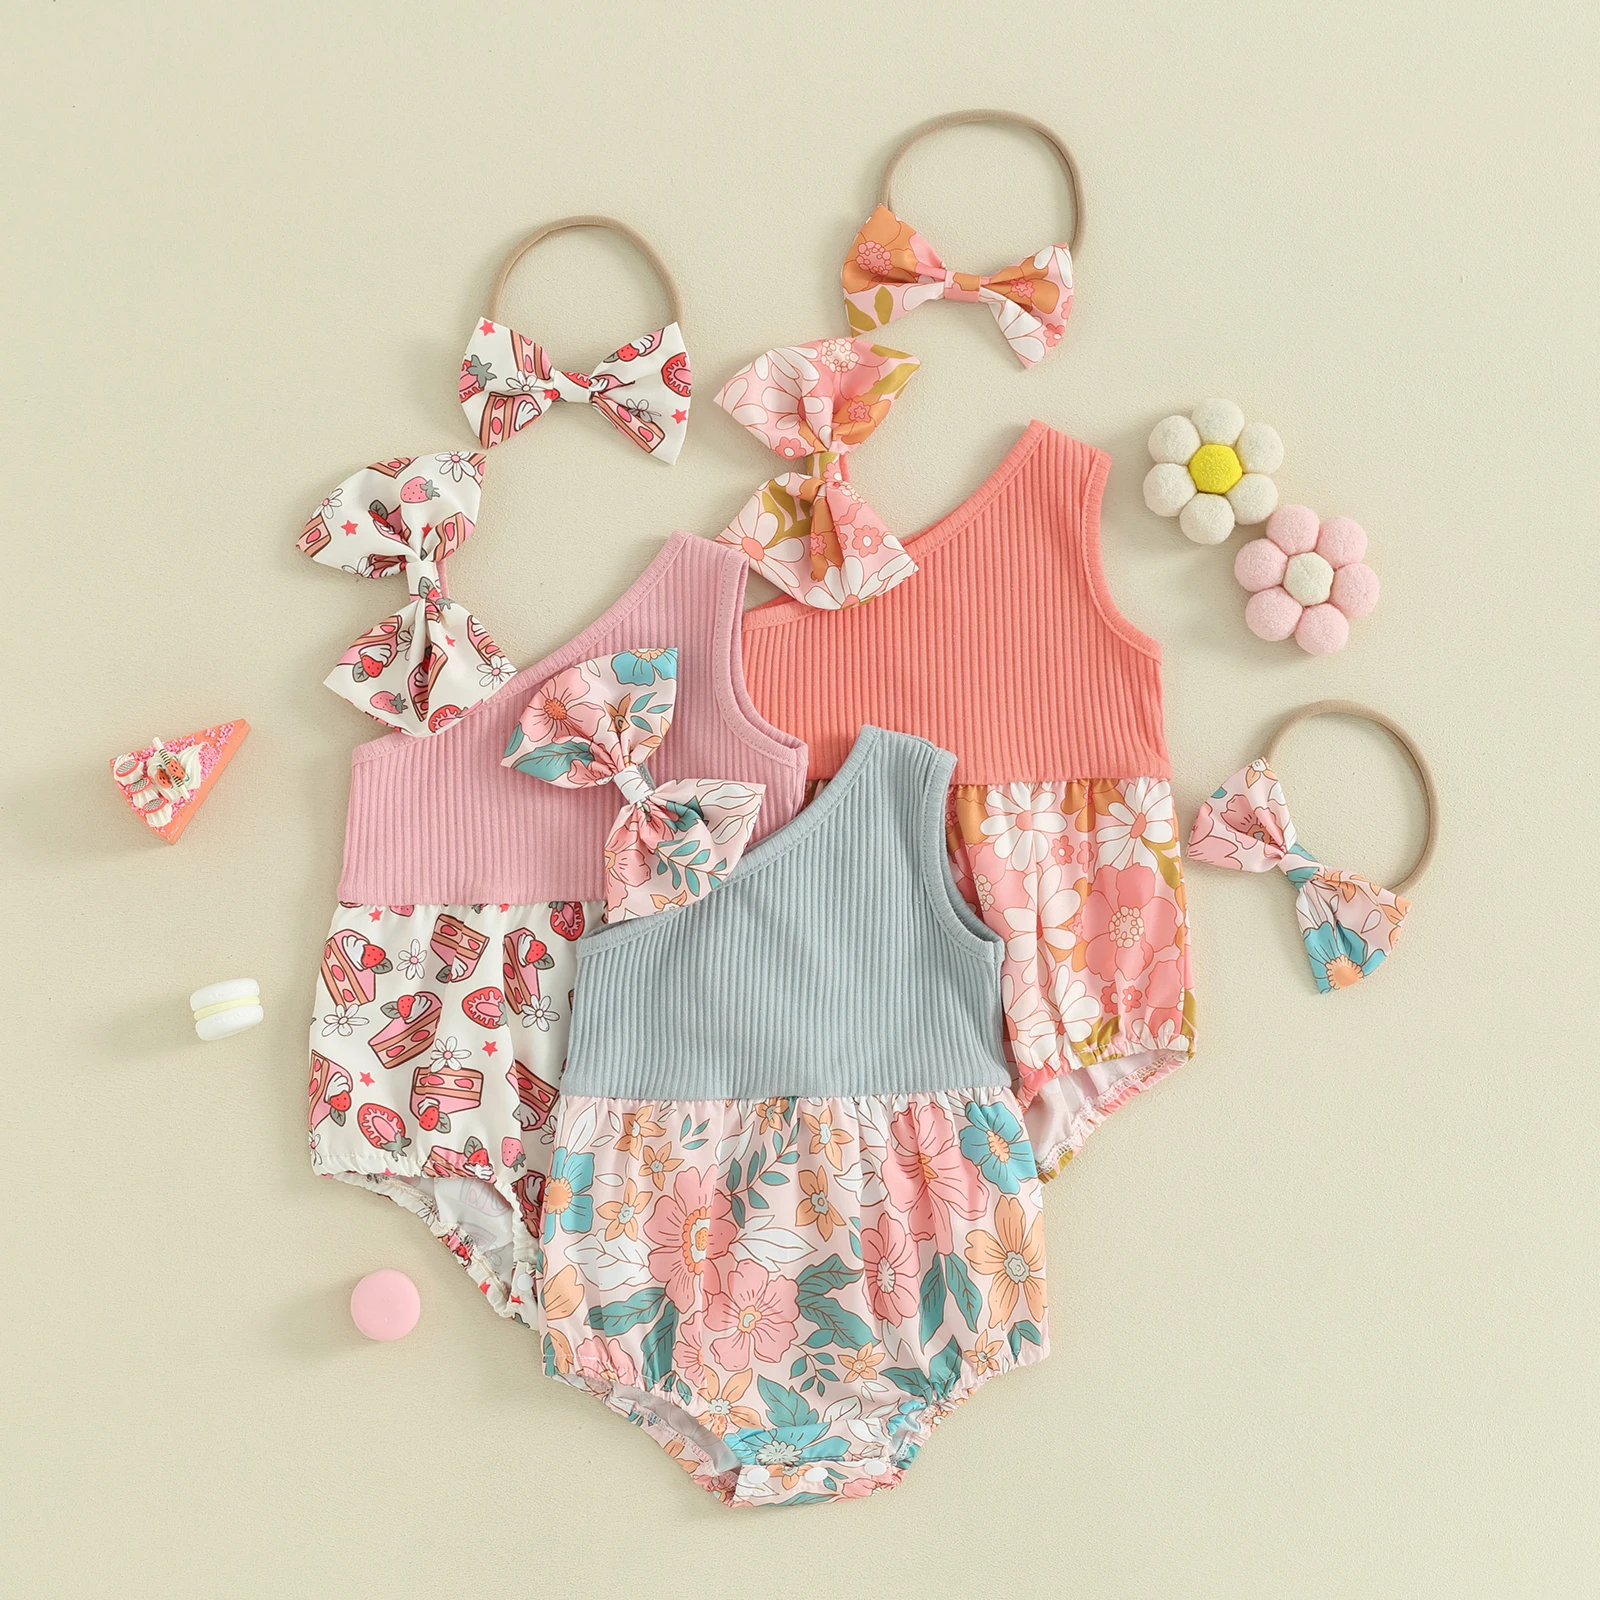 

Newborn Girl Outfit, Asymmetric Flower Print Sleeveless Romper with Bow Hairband Summer Clothes